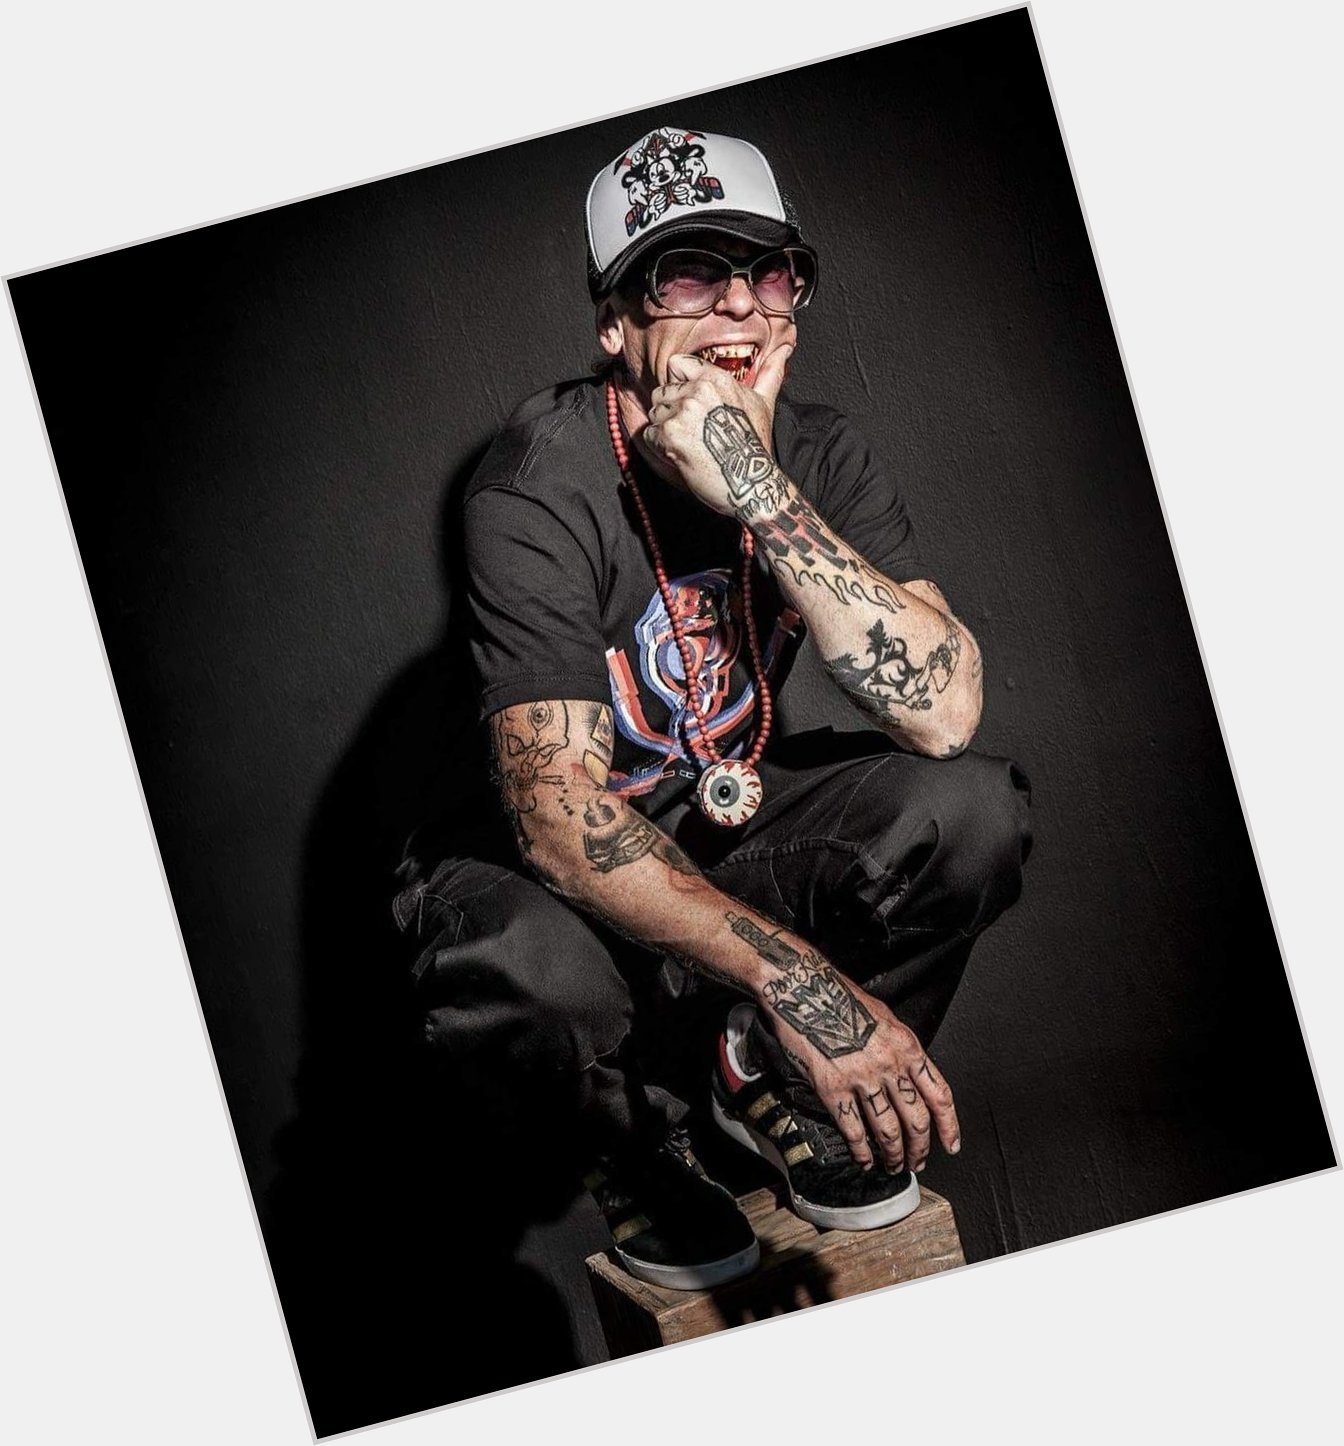 Birthday shout out to Mr. Sid Wilson of Happy Birthday !! 